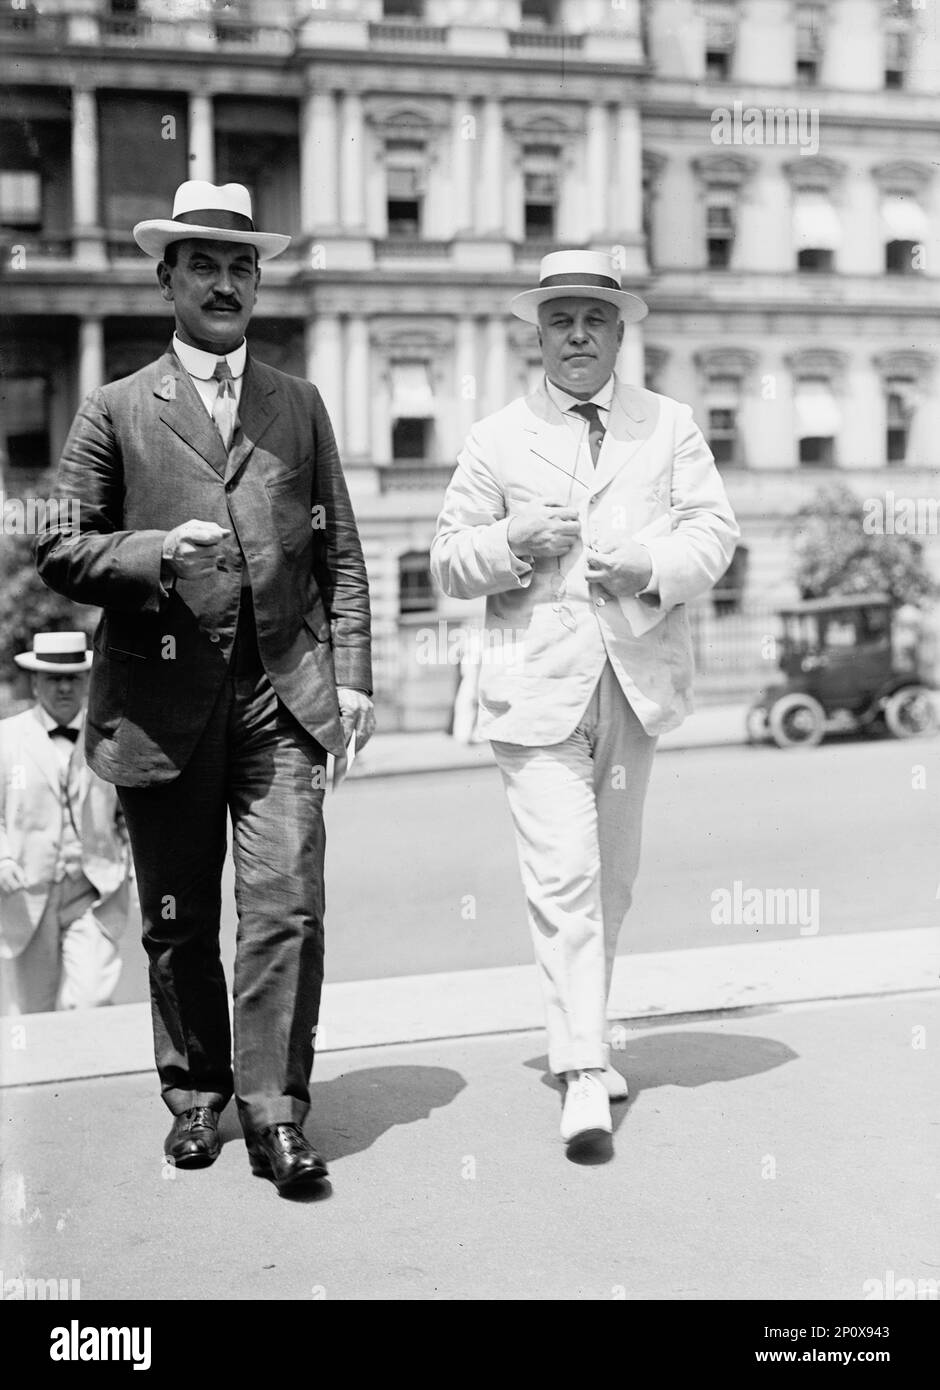 Franklin Knight Lane, right, 1914. Commissioner of the Interstate Commerce Commission 1905-1913, Secretary of the Interior 1913-1920. Stock Photo